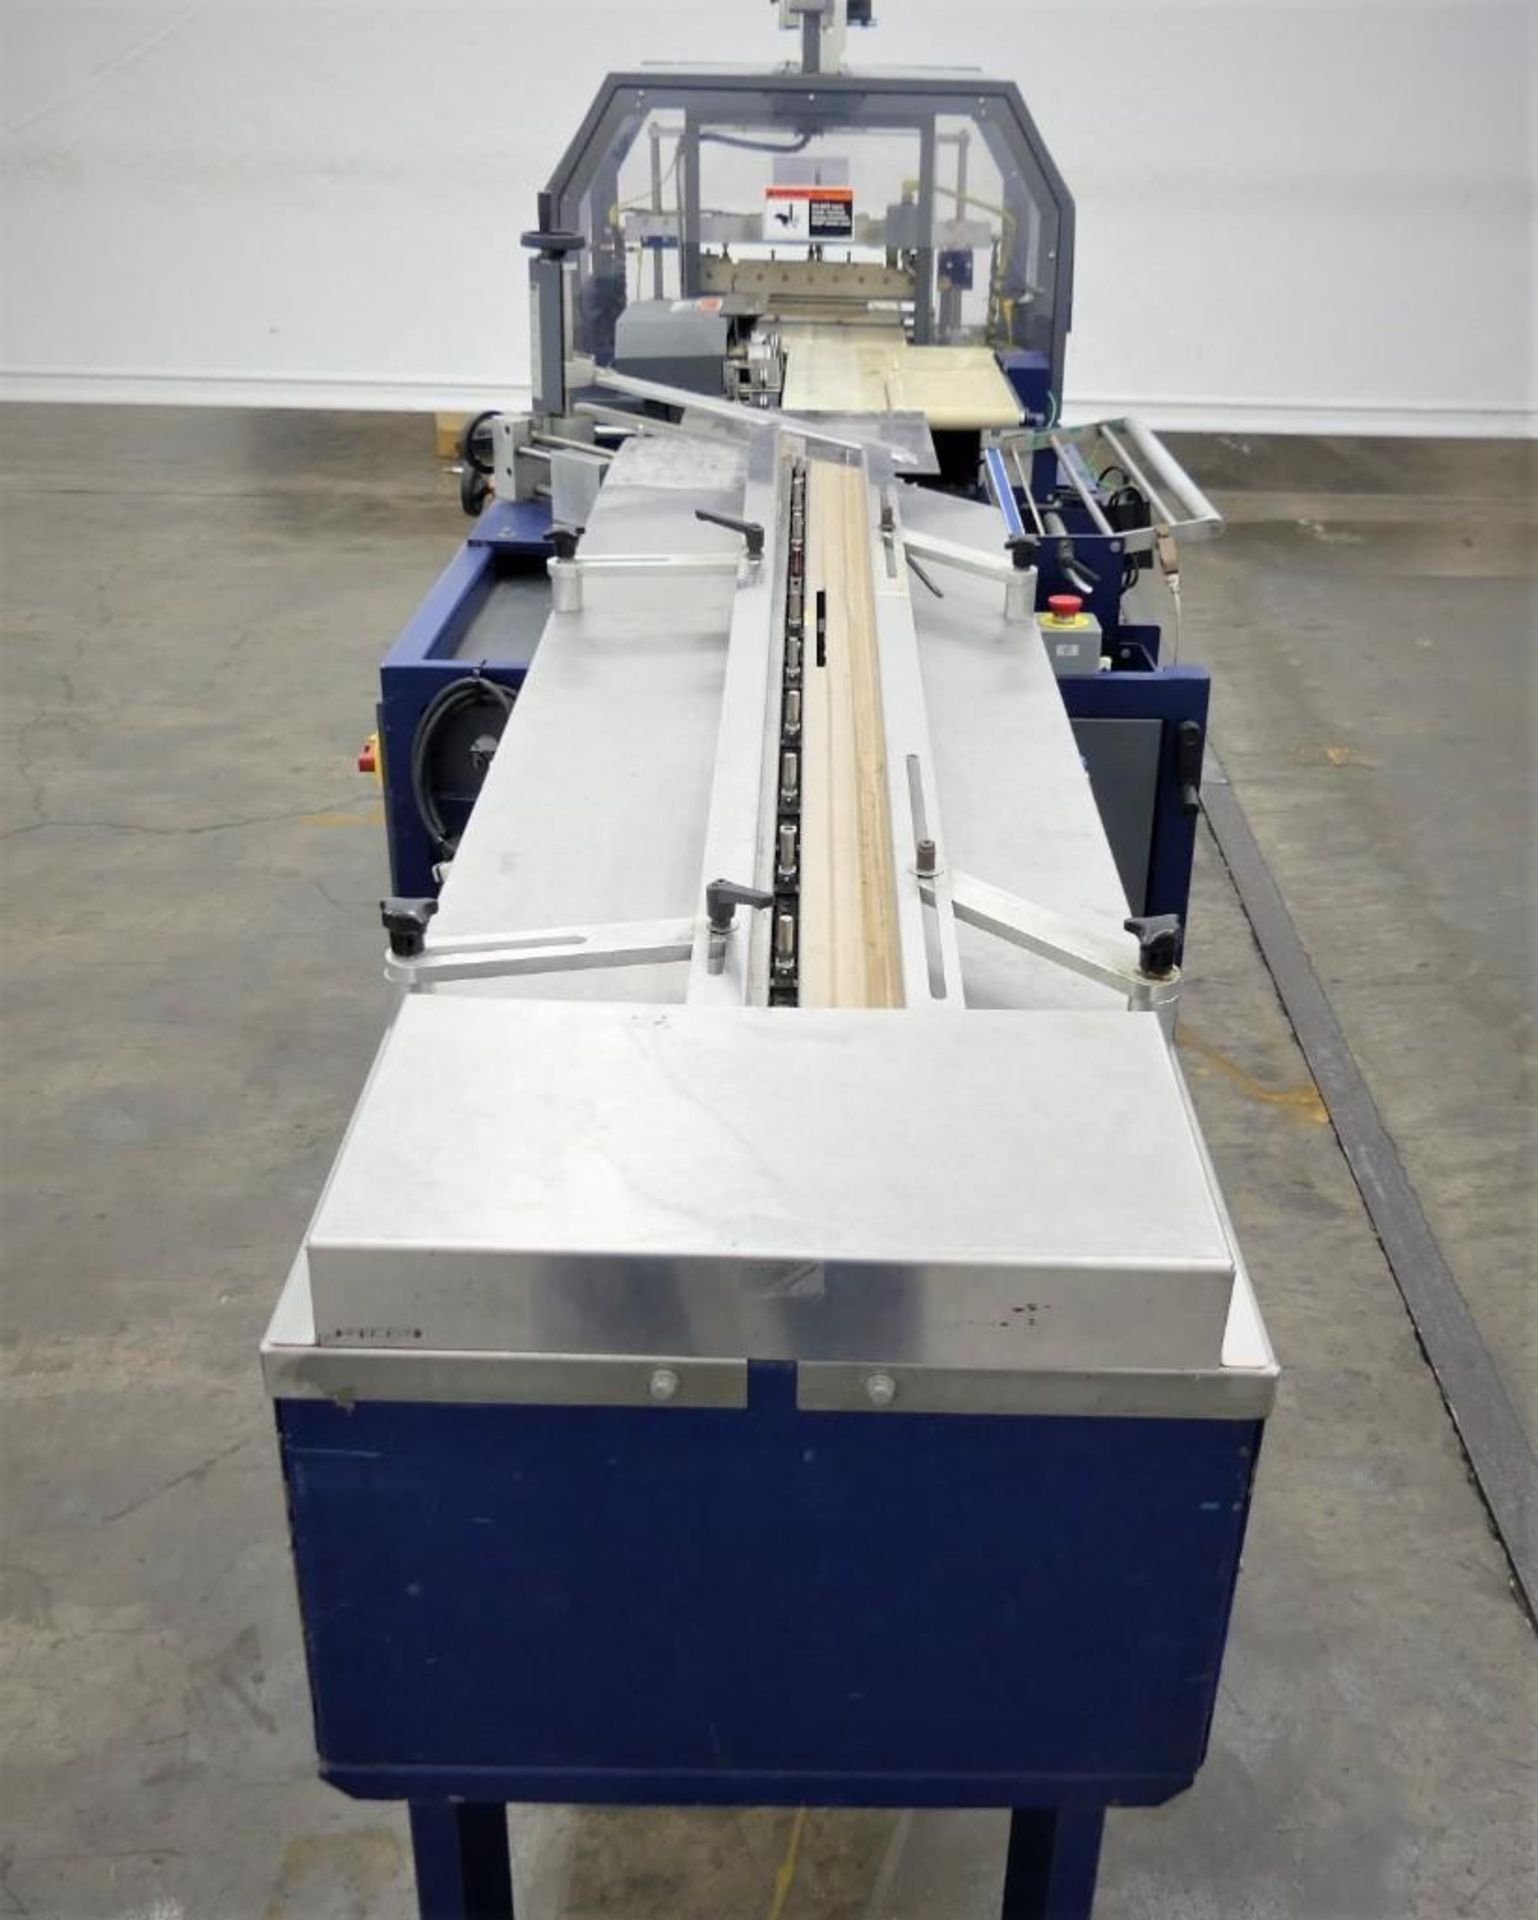 Lantech 200 Side Sealer Includes all parts, electronic components, manuals, etc - Image 4 of 17